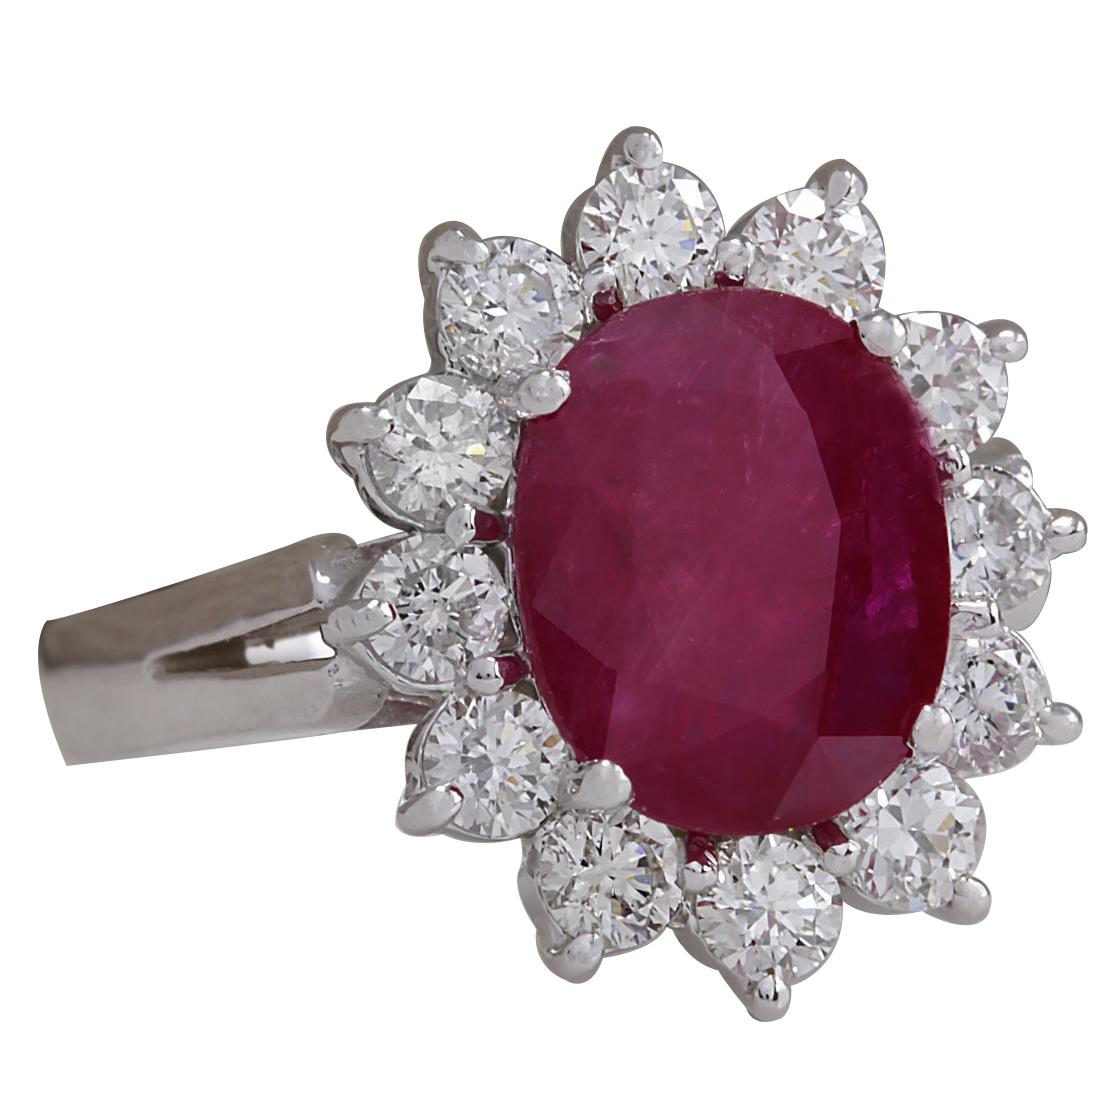 Stamped: 14K White Gold
Total Ring Weight: 4.6 Grams
Total Natural Ruby Weight is 3.03 Carat (Measures: 10.00x8.00 mm)
Color: Red
Total Natural Diamond Weight is 1.00 Carat
Color: F-G, Clarity: VS2-SI1
Face Measures: 16.70x14.65 mm
Sku: [702771W]